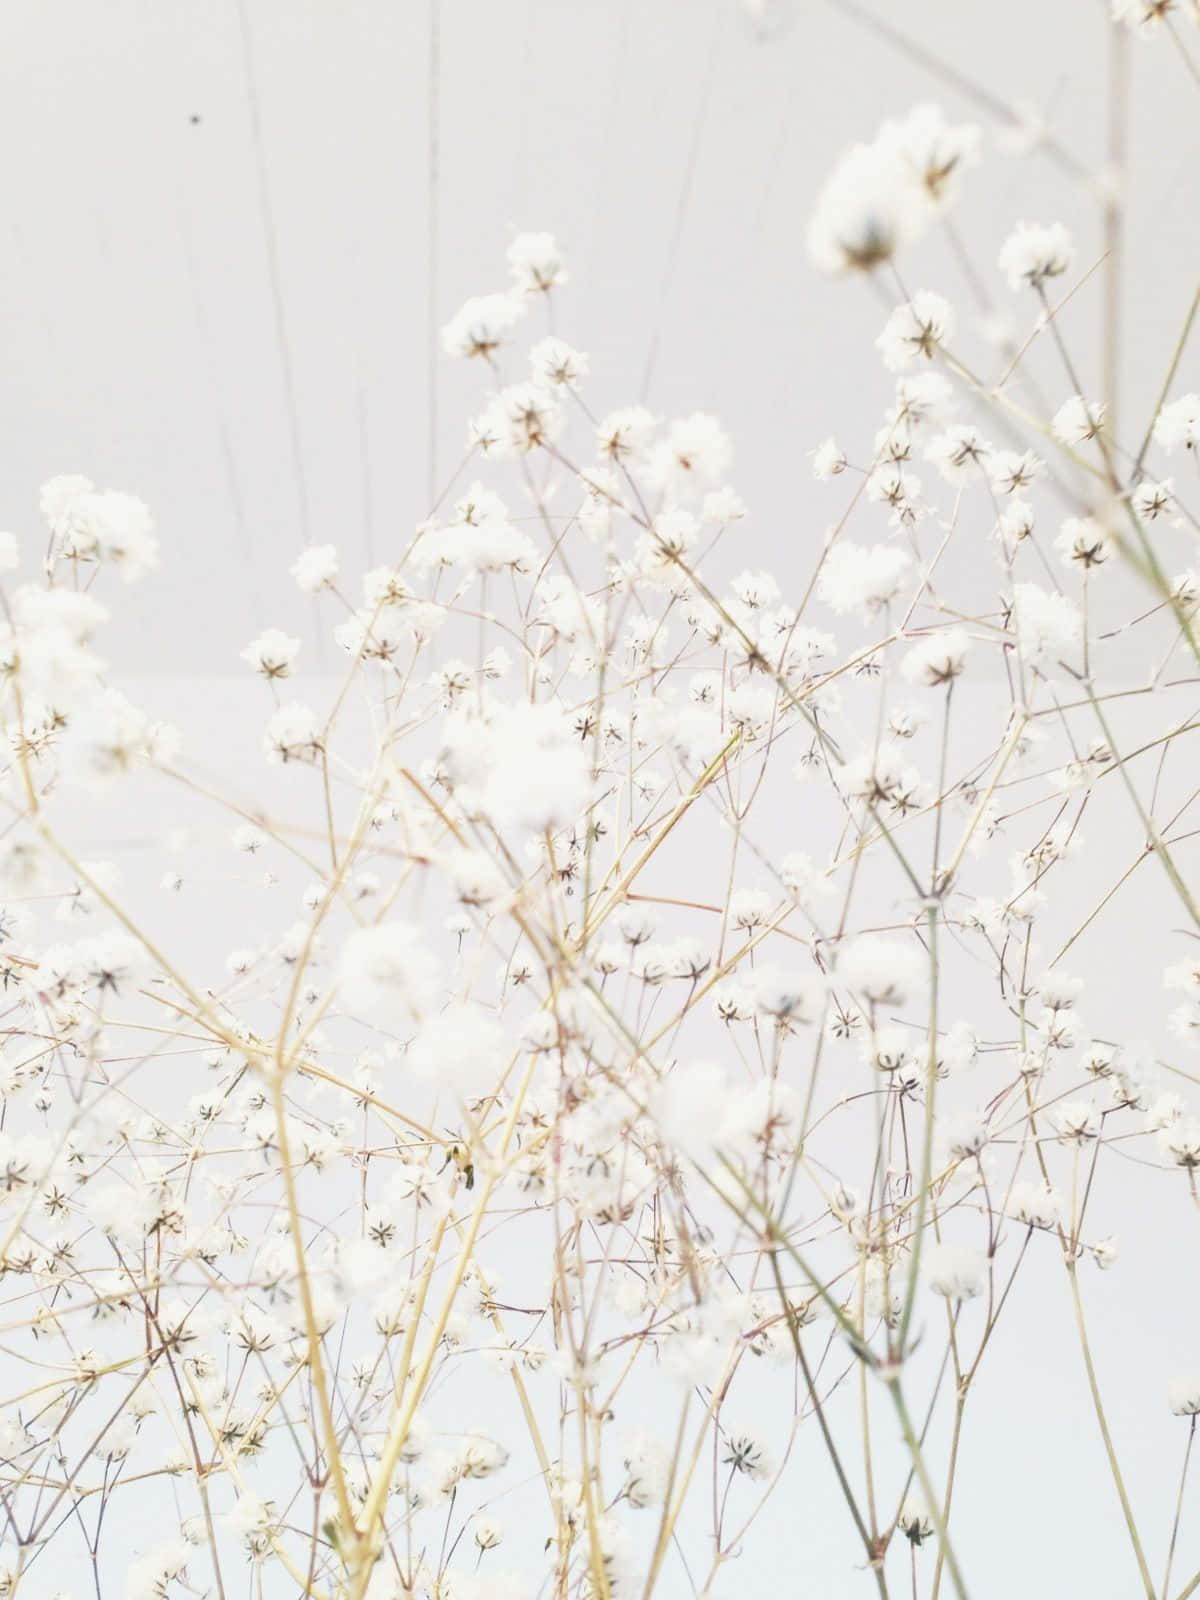 White Flowers In A Vase Against A White Sky